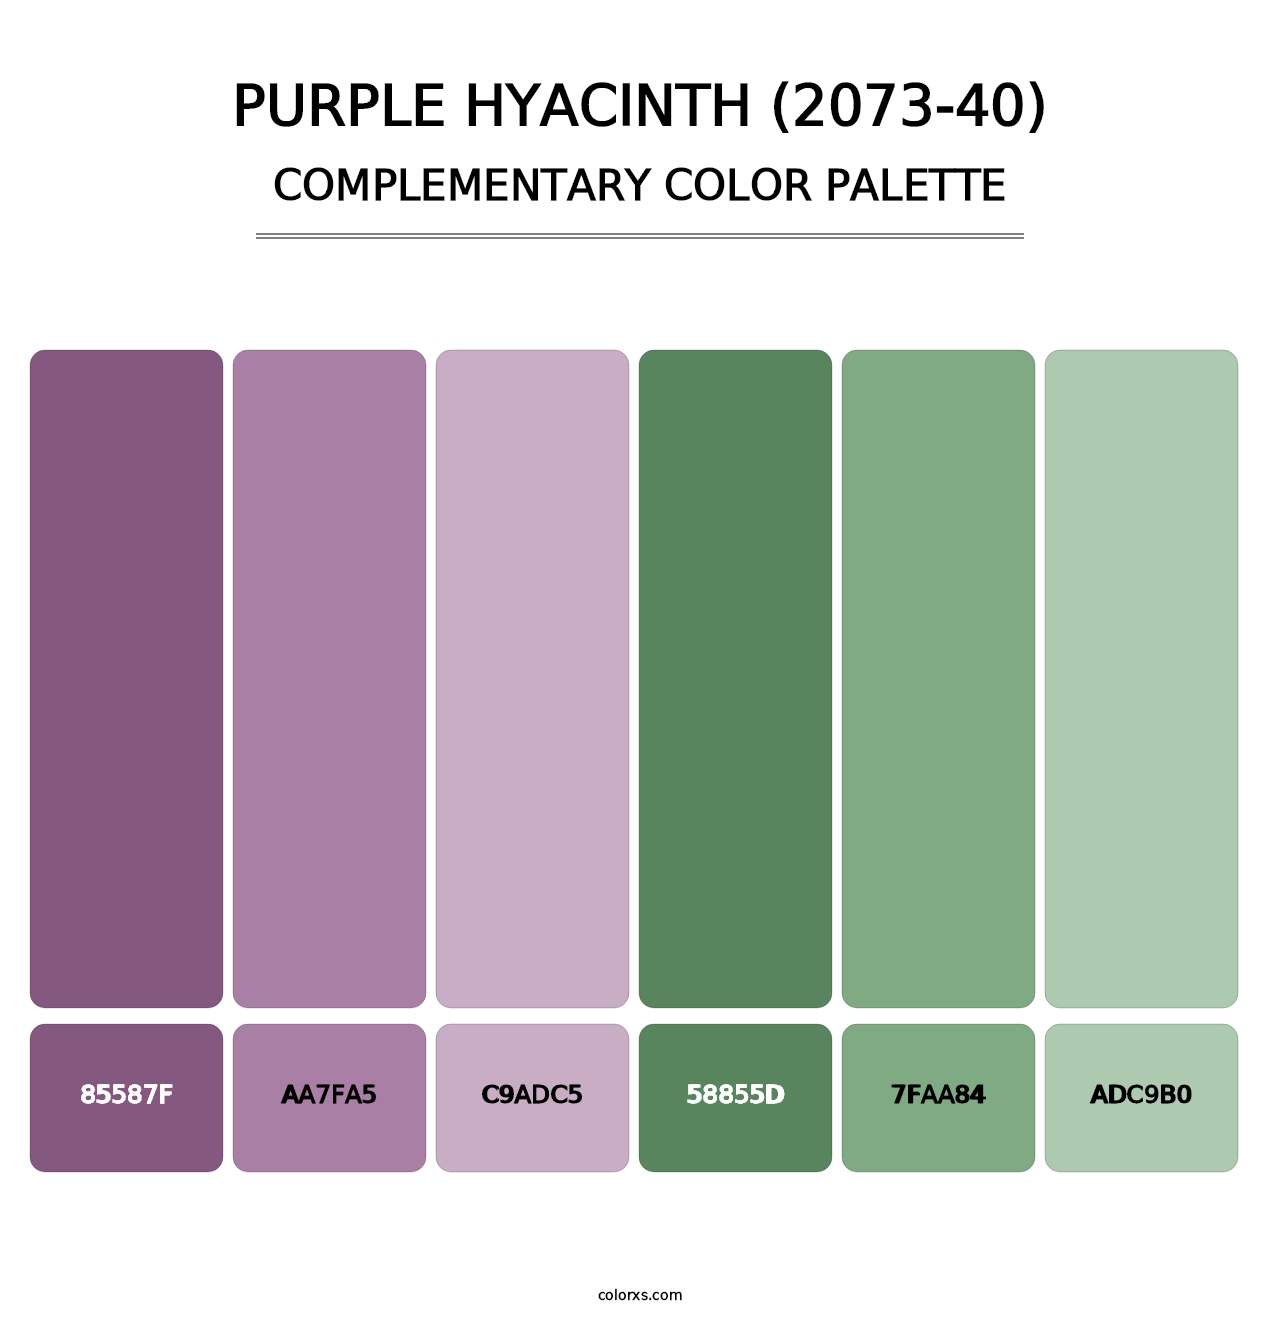 Purple Hyacinth (2073-40) - Complementary Color Palette